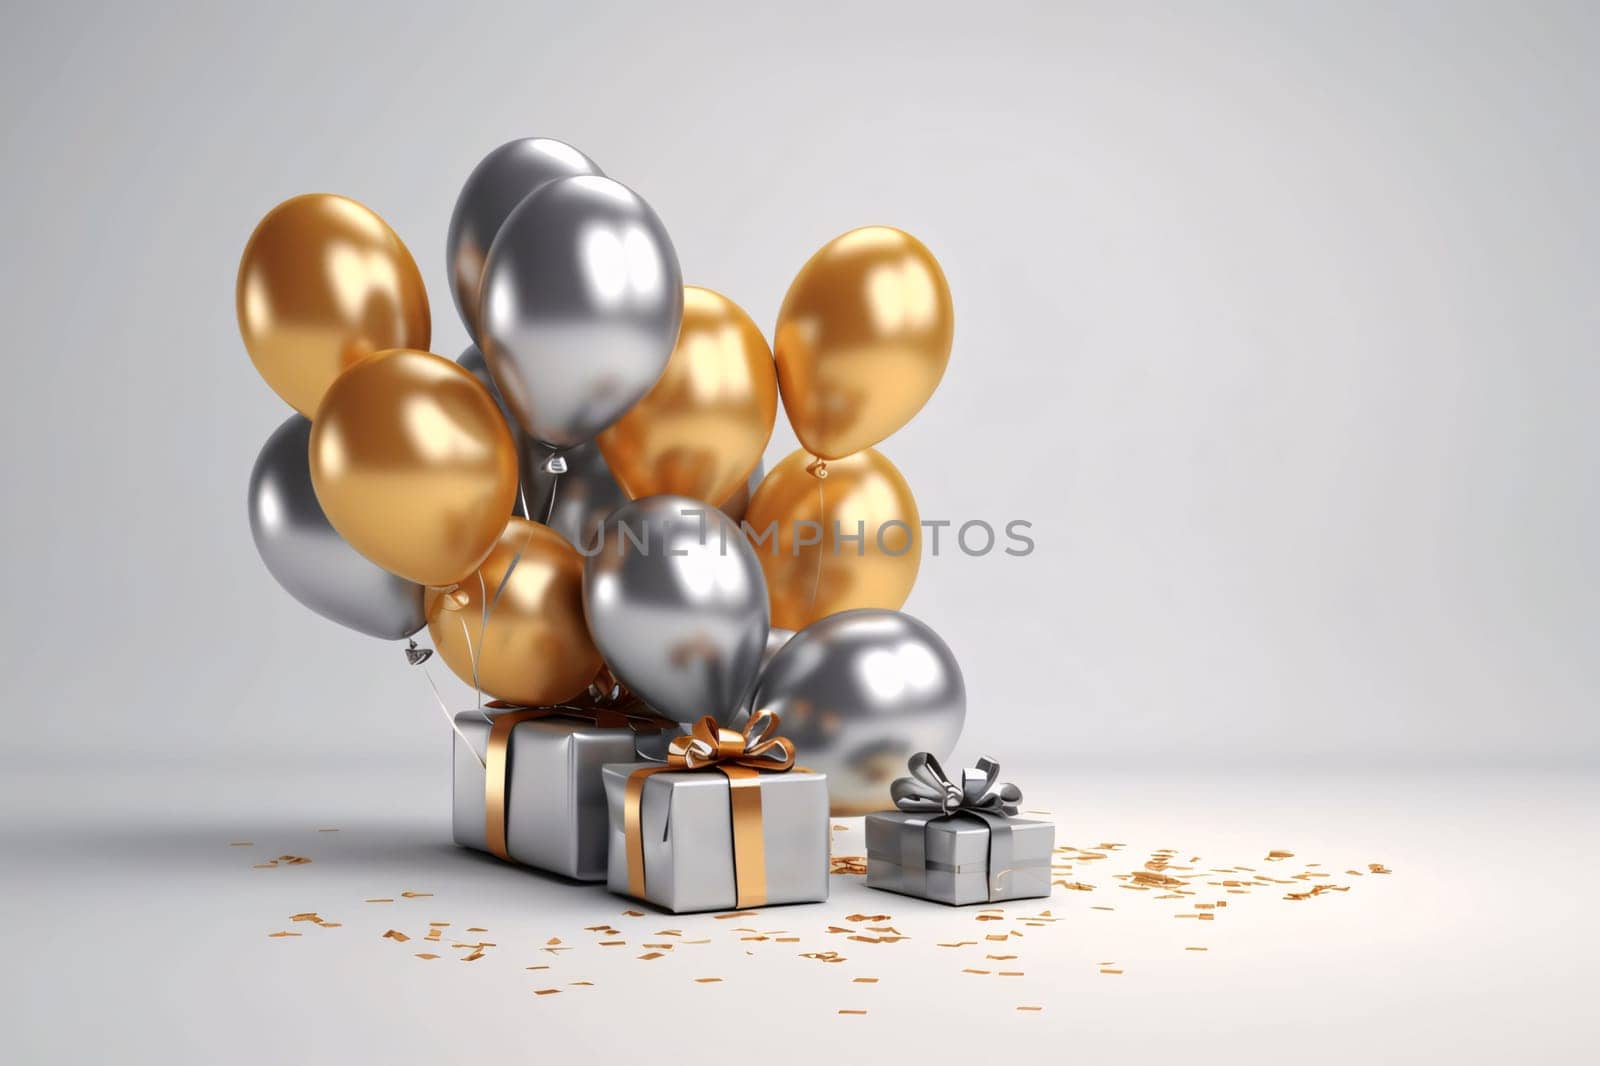 Banner: Gift box with golden and silver balloons. 3D rendering.